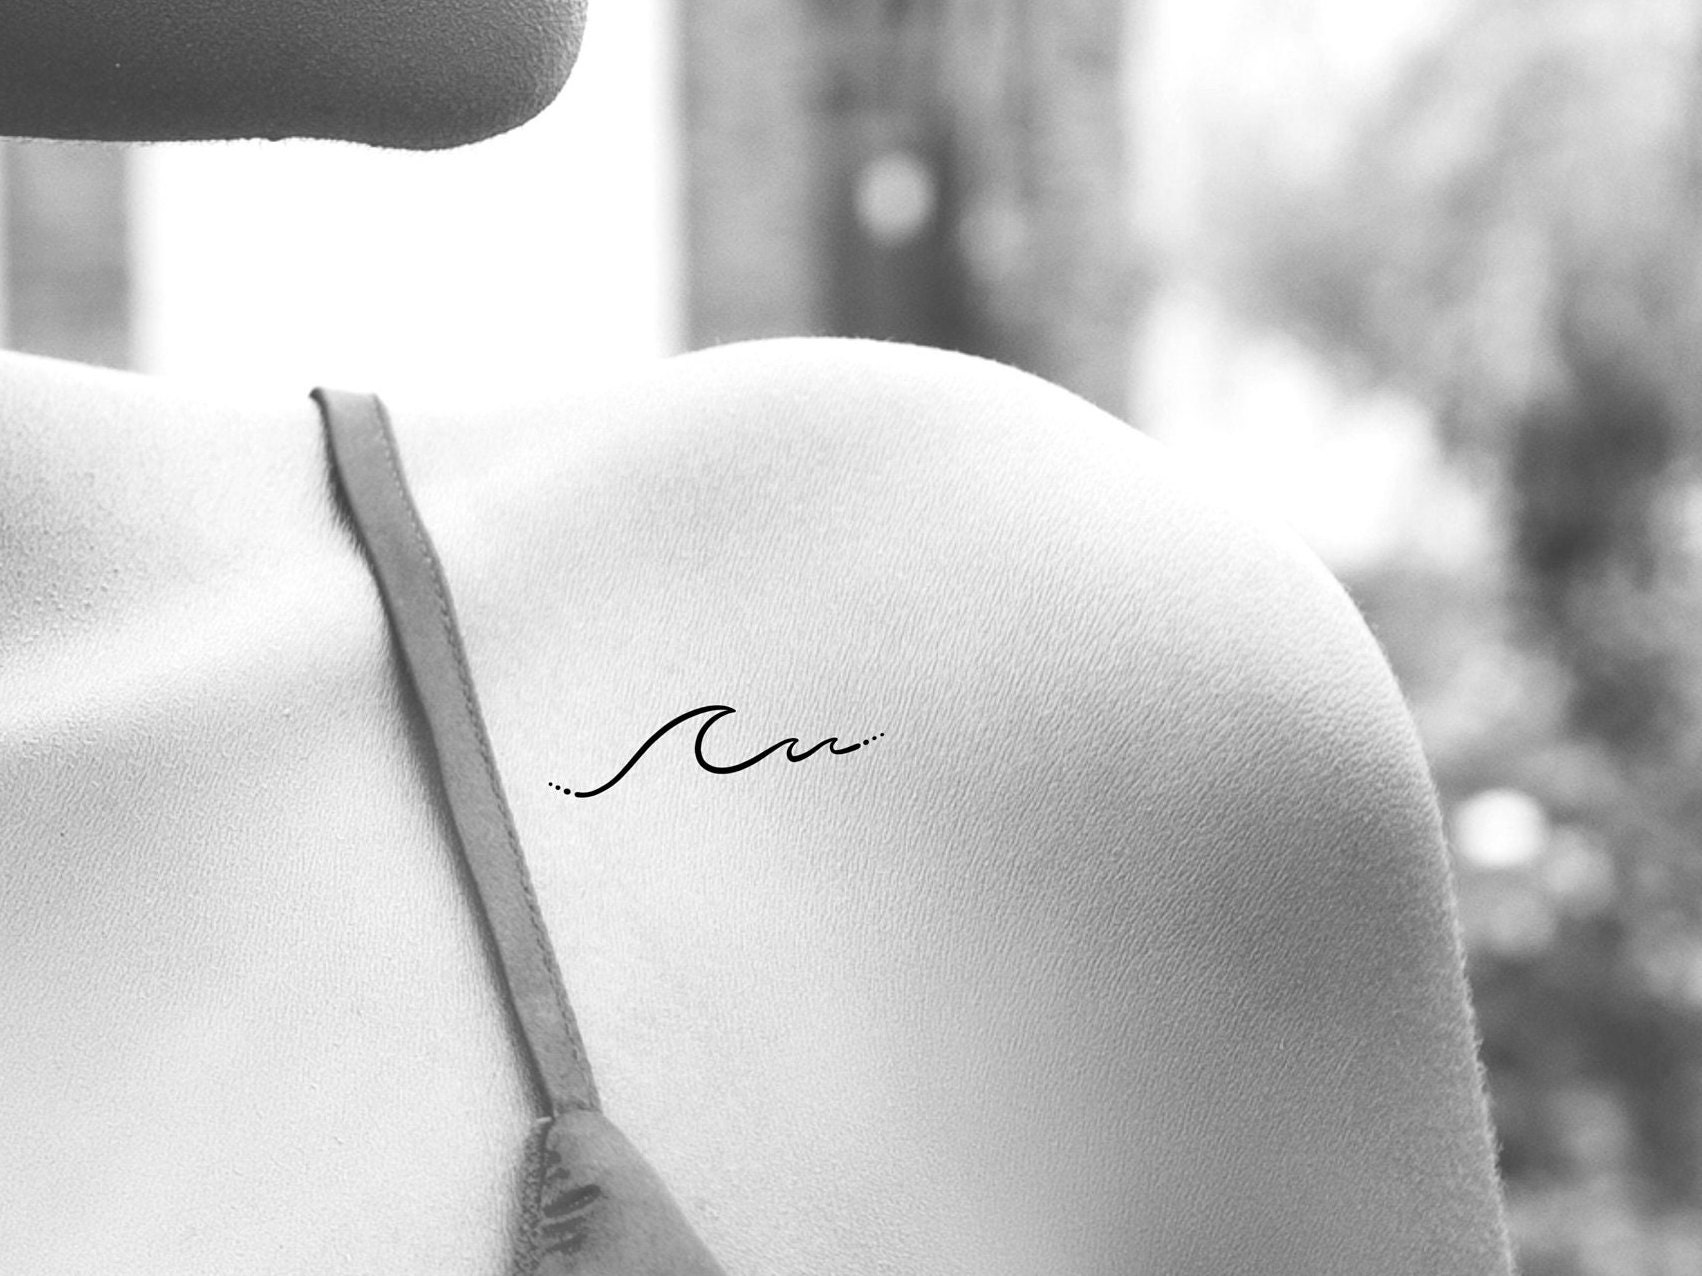 15 Side Rib Tattoo Ideas For Your First Ink | Preview.ph